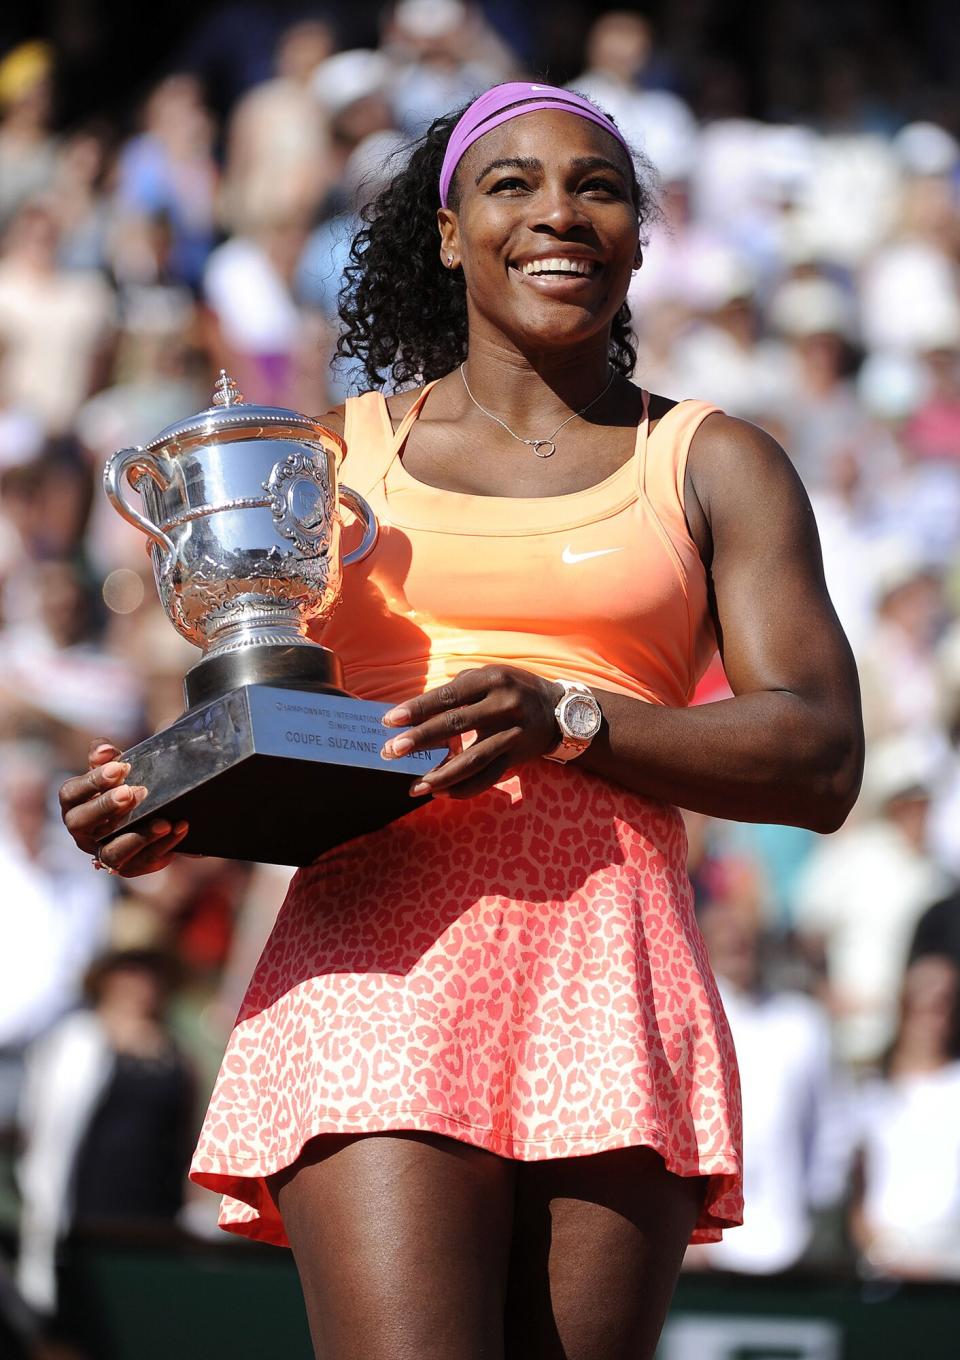 Serena Williams won the Women Final against Lucie Safarova (not in picture) during the 2015 Roland Garros French Tennis Open - Day Fourteen, on June 6, 2015 in Paris, France